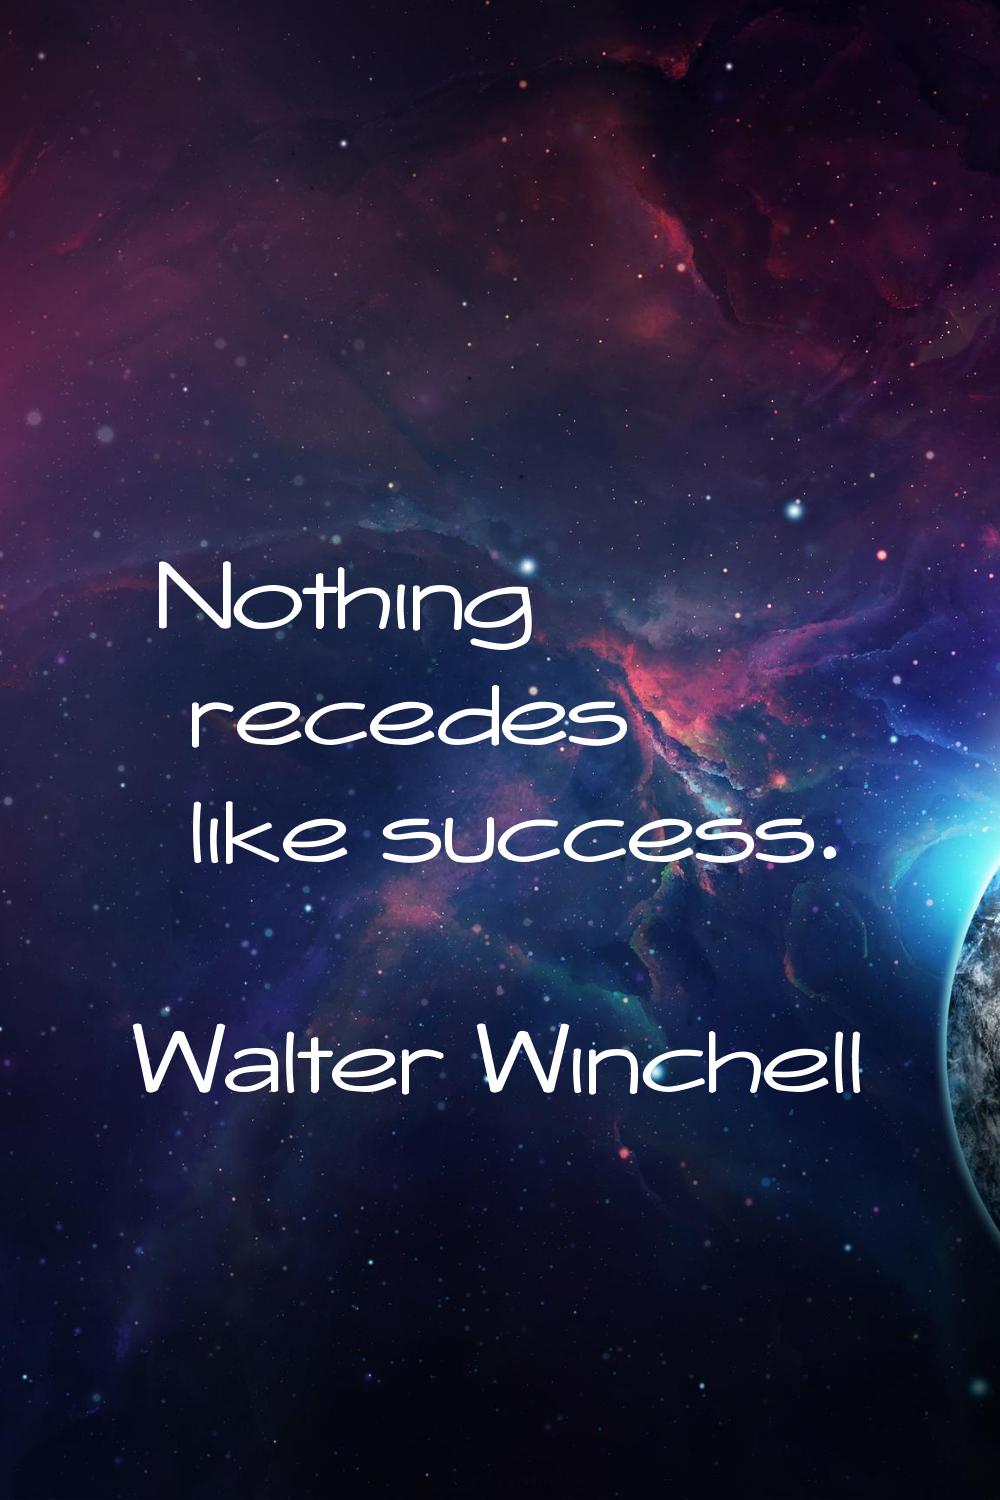 Nothing recedes like success.